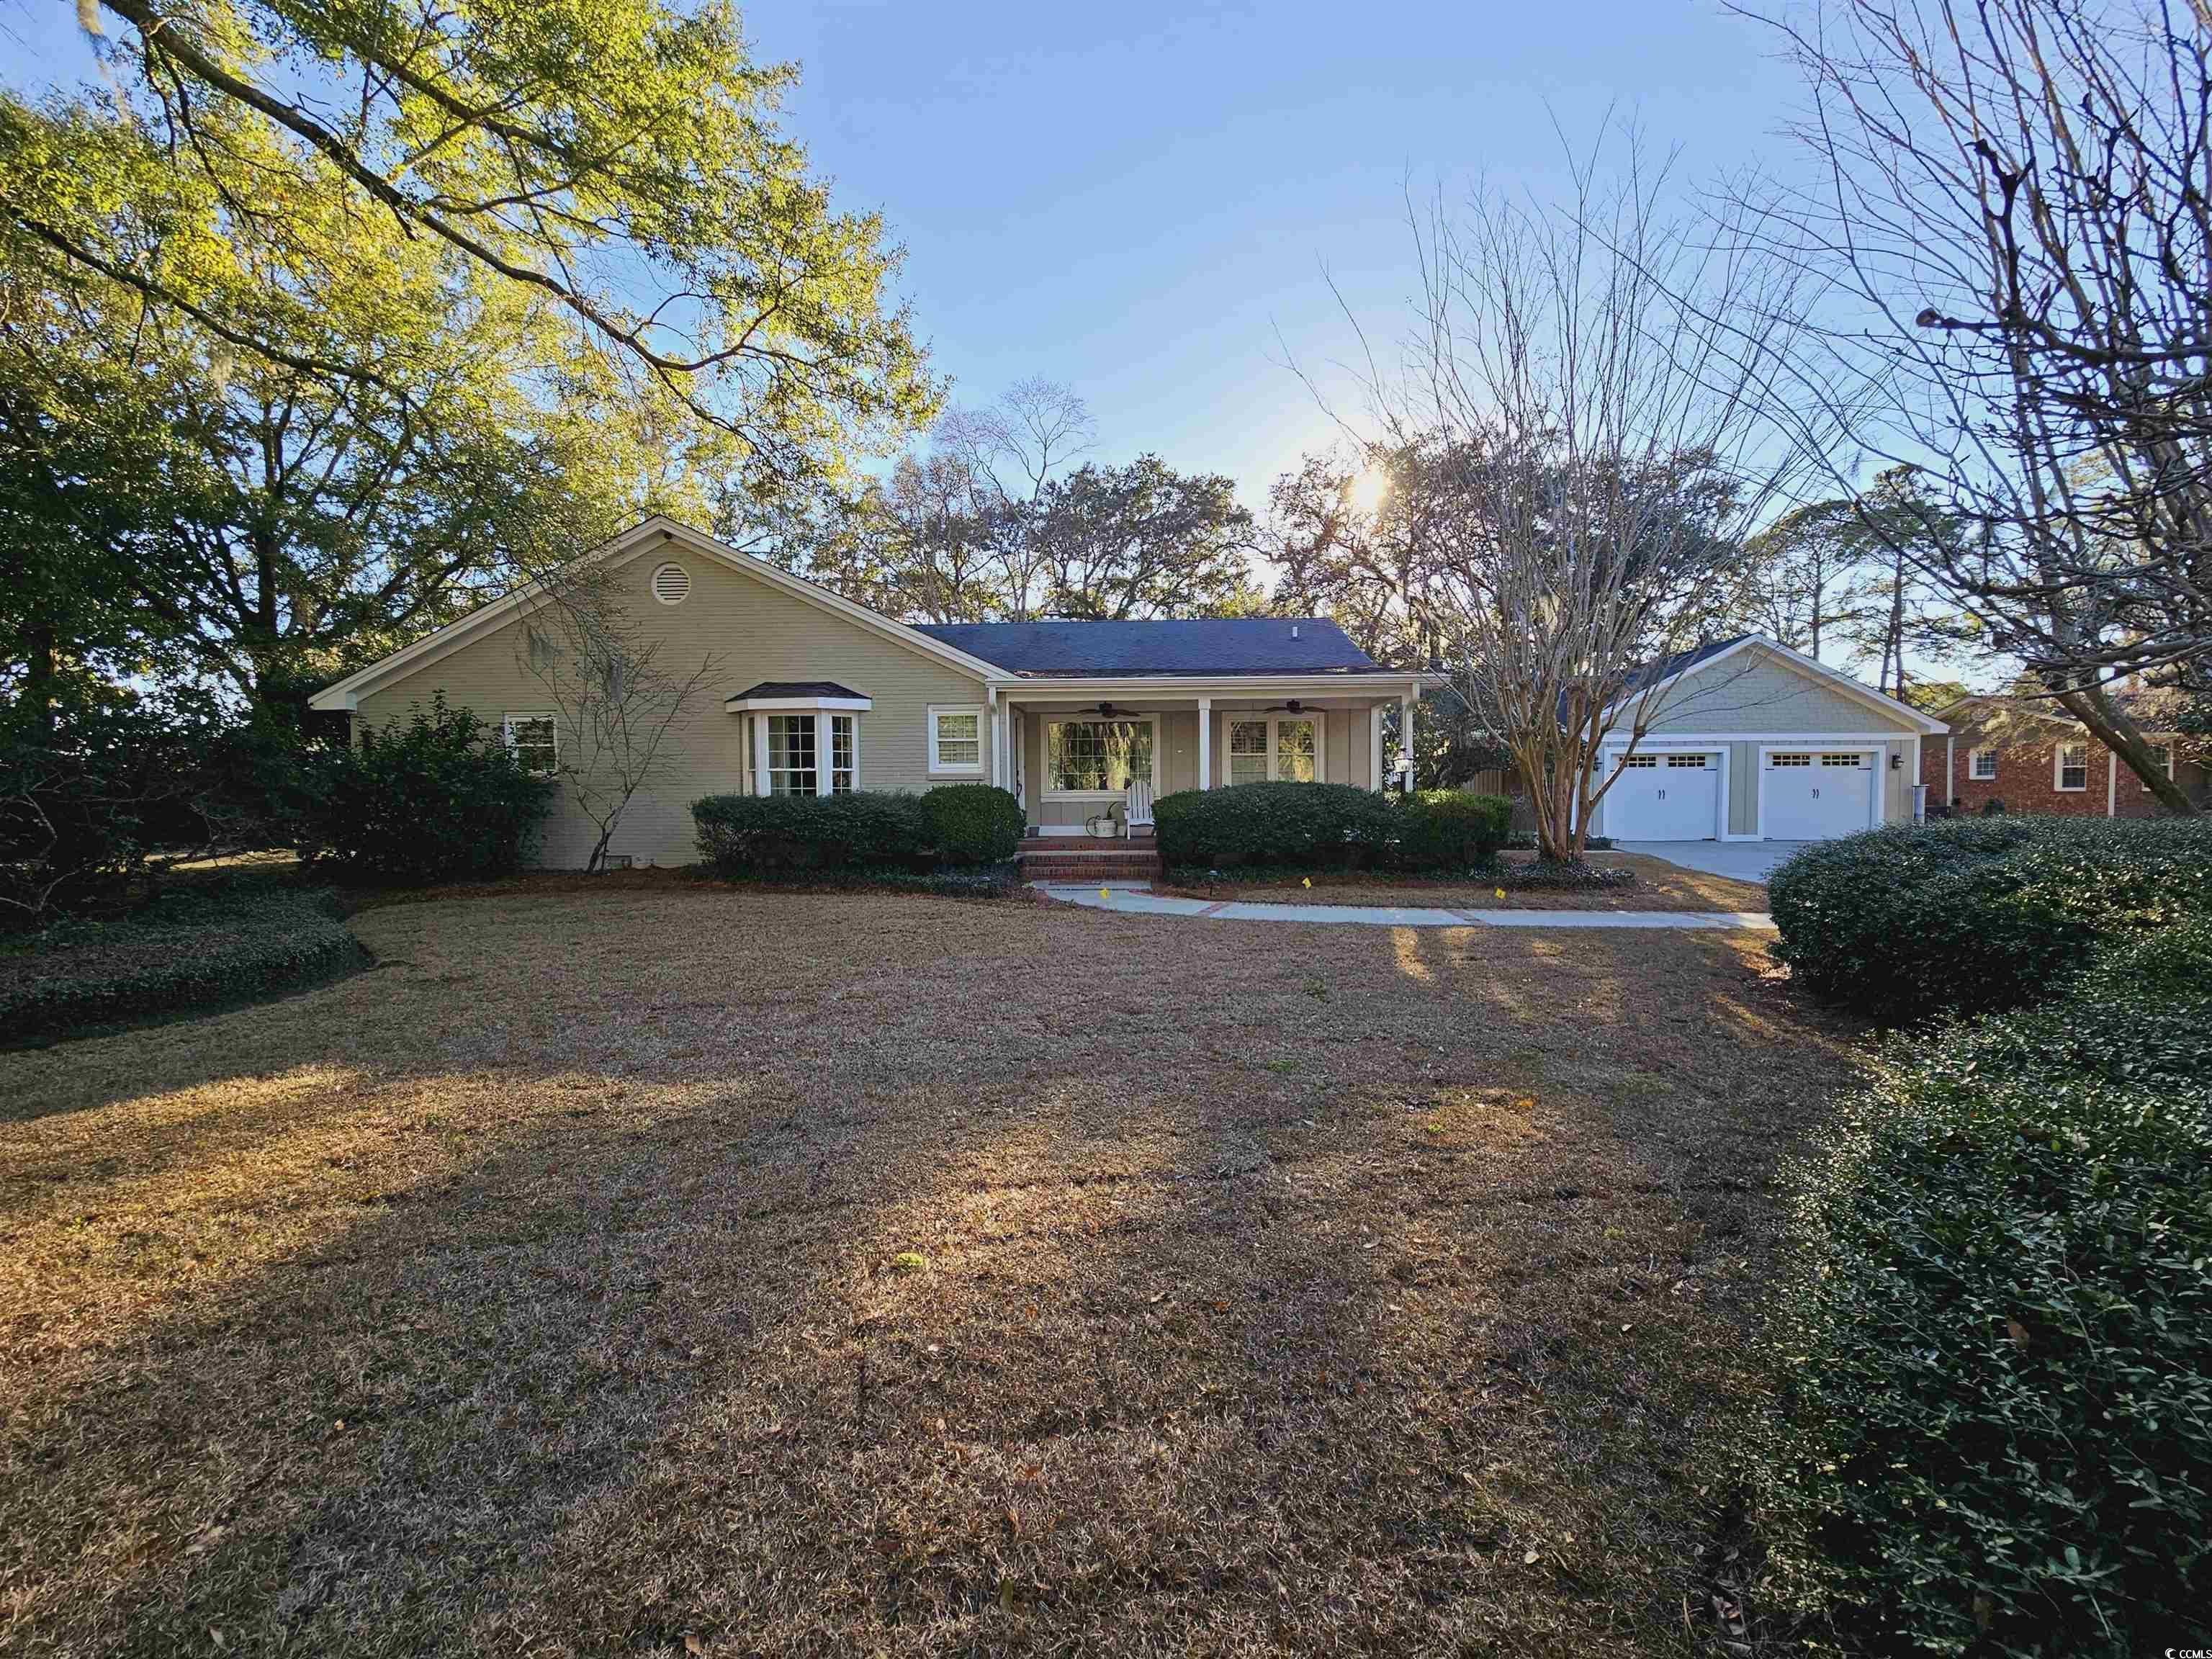 Photo one of 551 Vaux Hall Ave. Murrells Inlet SC 29576 | MLS 2403930